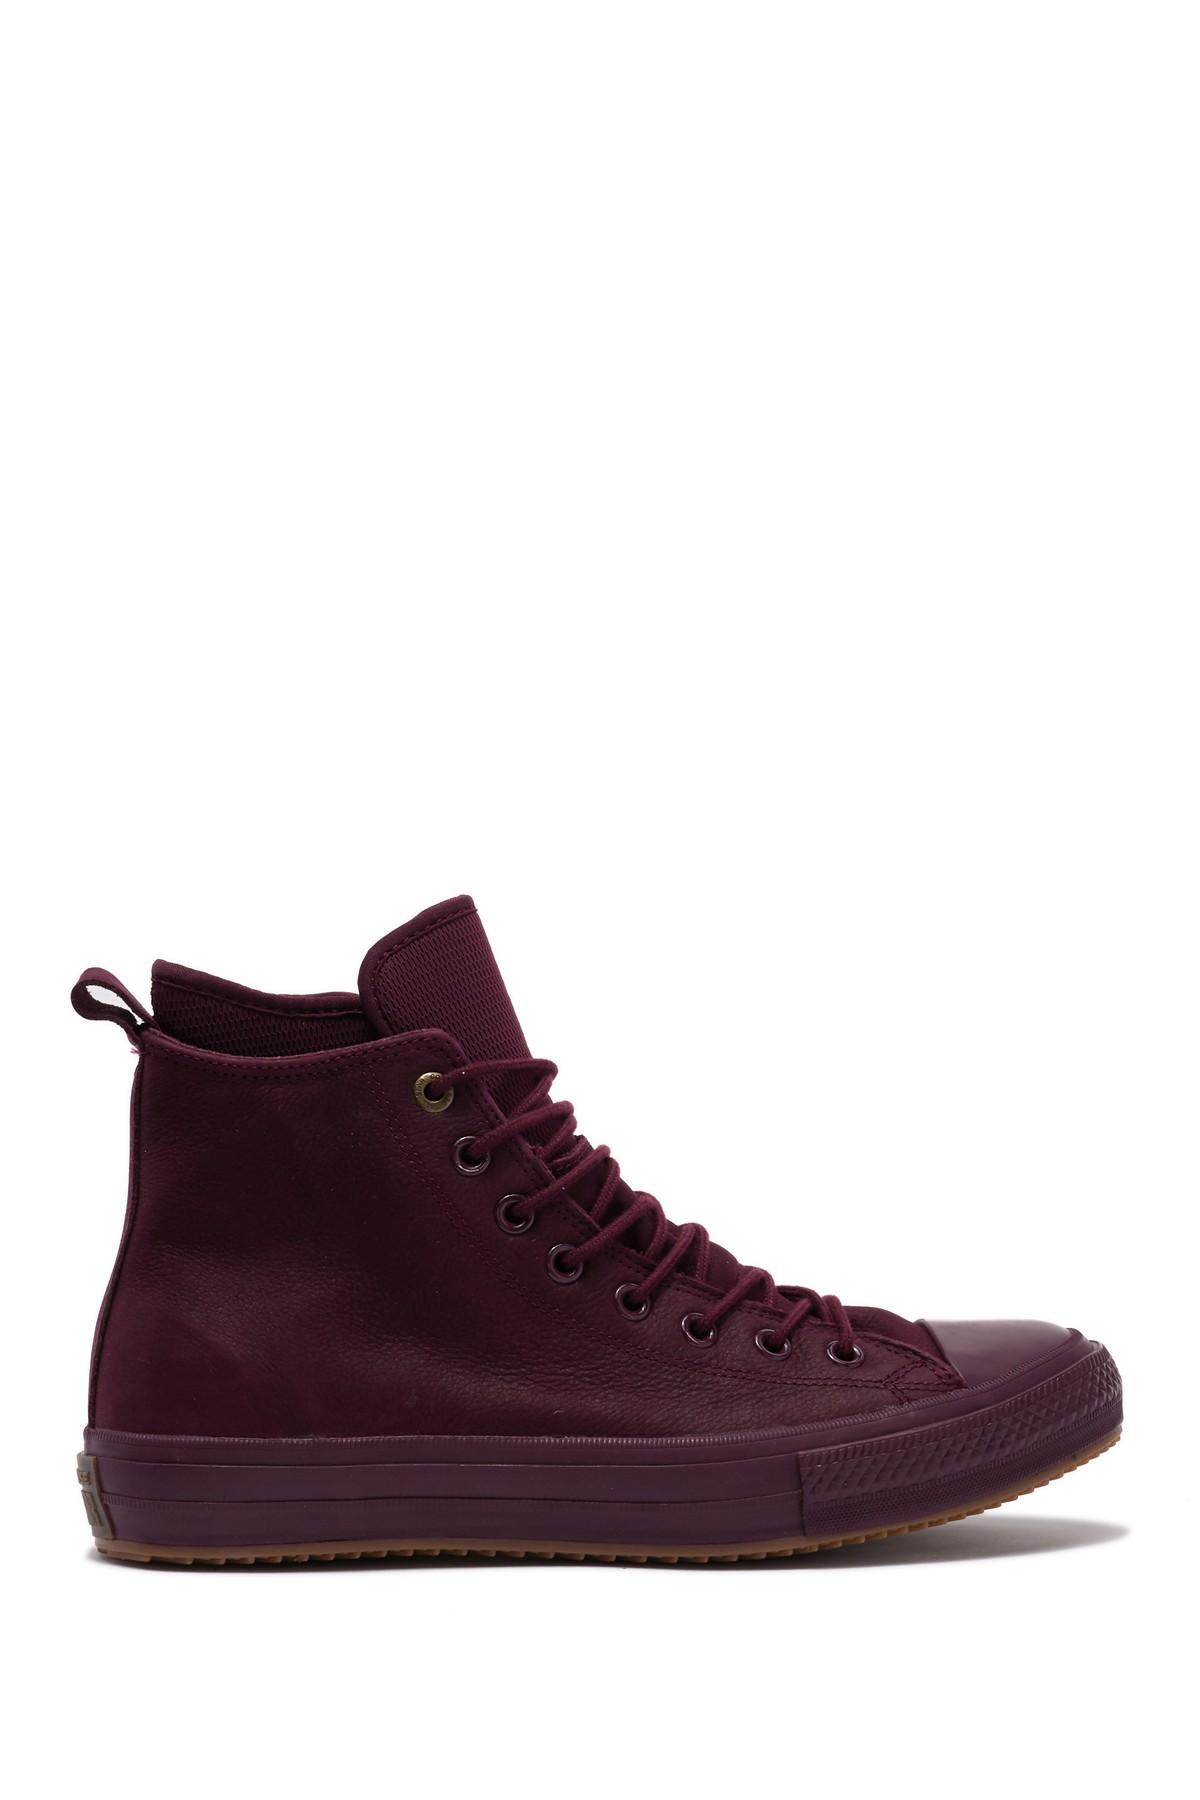 Converse Leather Dark Sangria All Star Wp Sneaker (unisex) for Men | Lyst